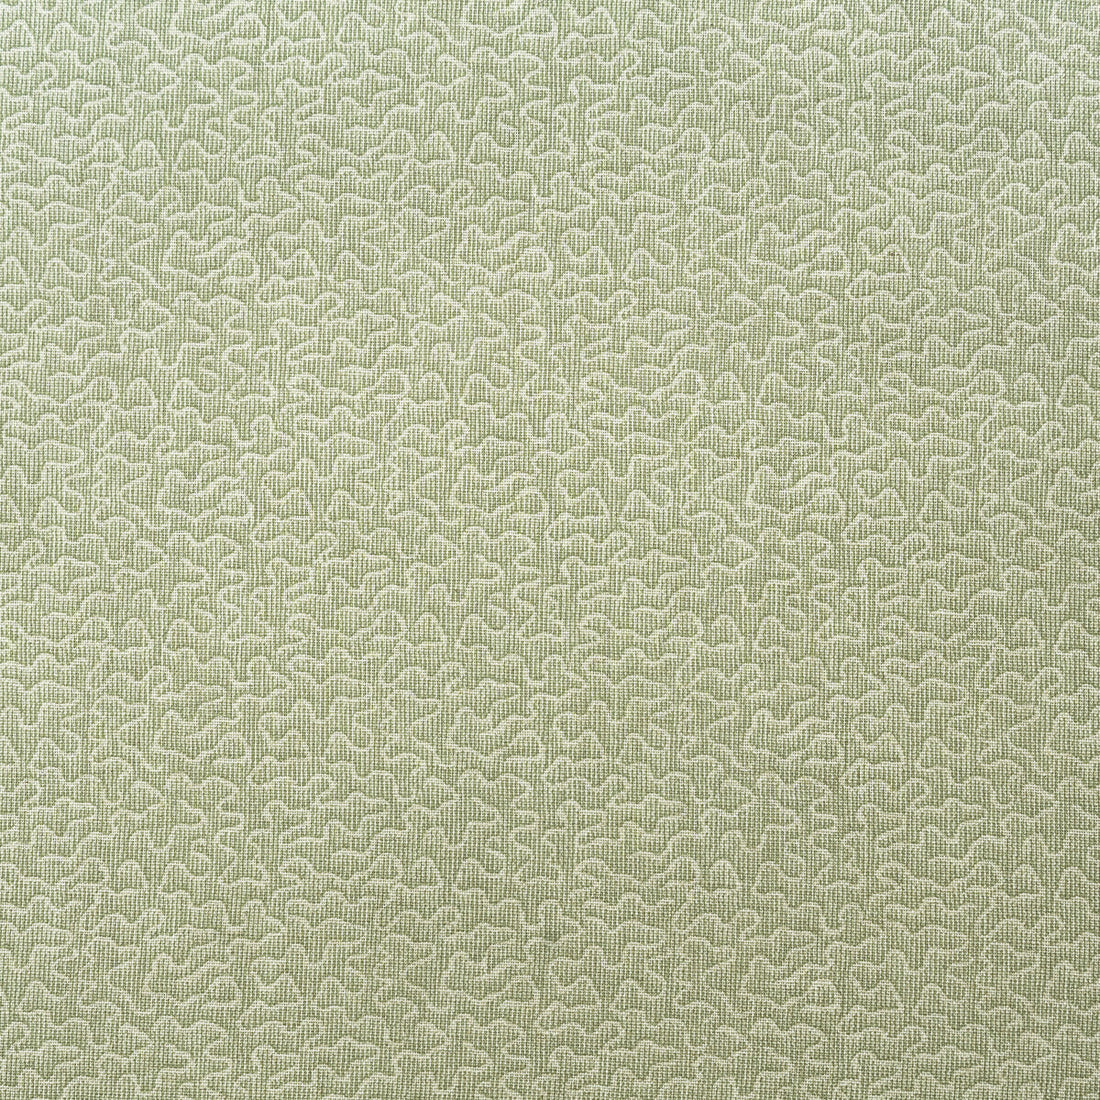 Pollen fabric in fennel color - pattern AM100383.123.0 - by Kravet Couture in the Andrew Martin Garden Path collection